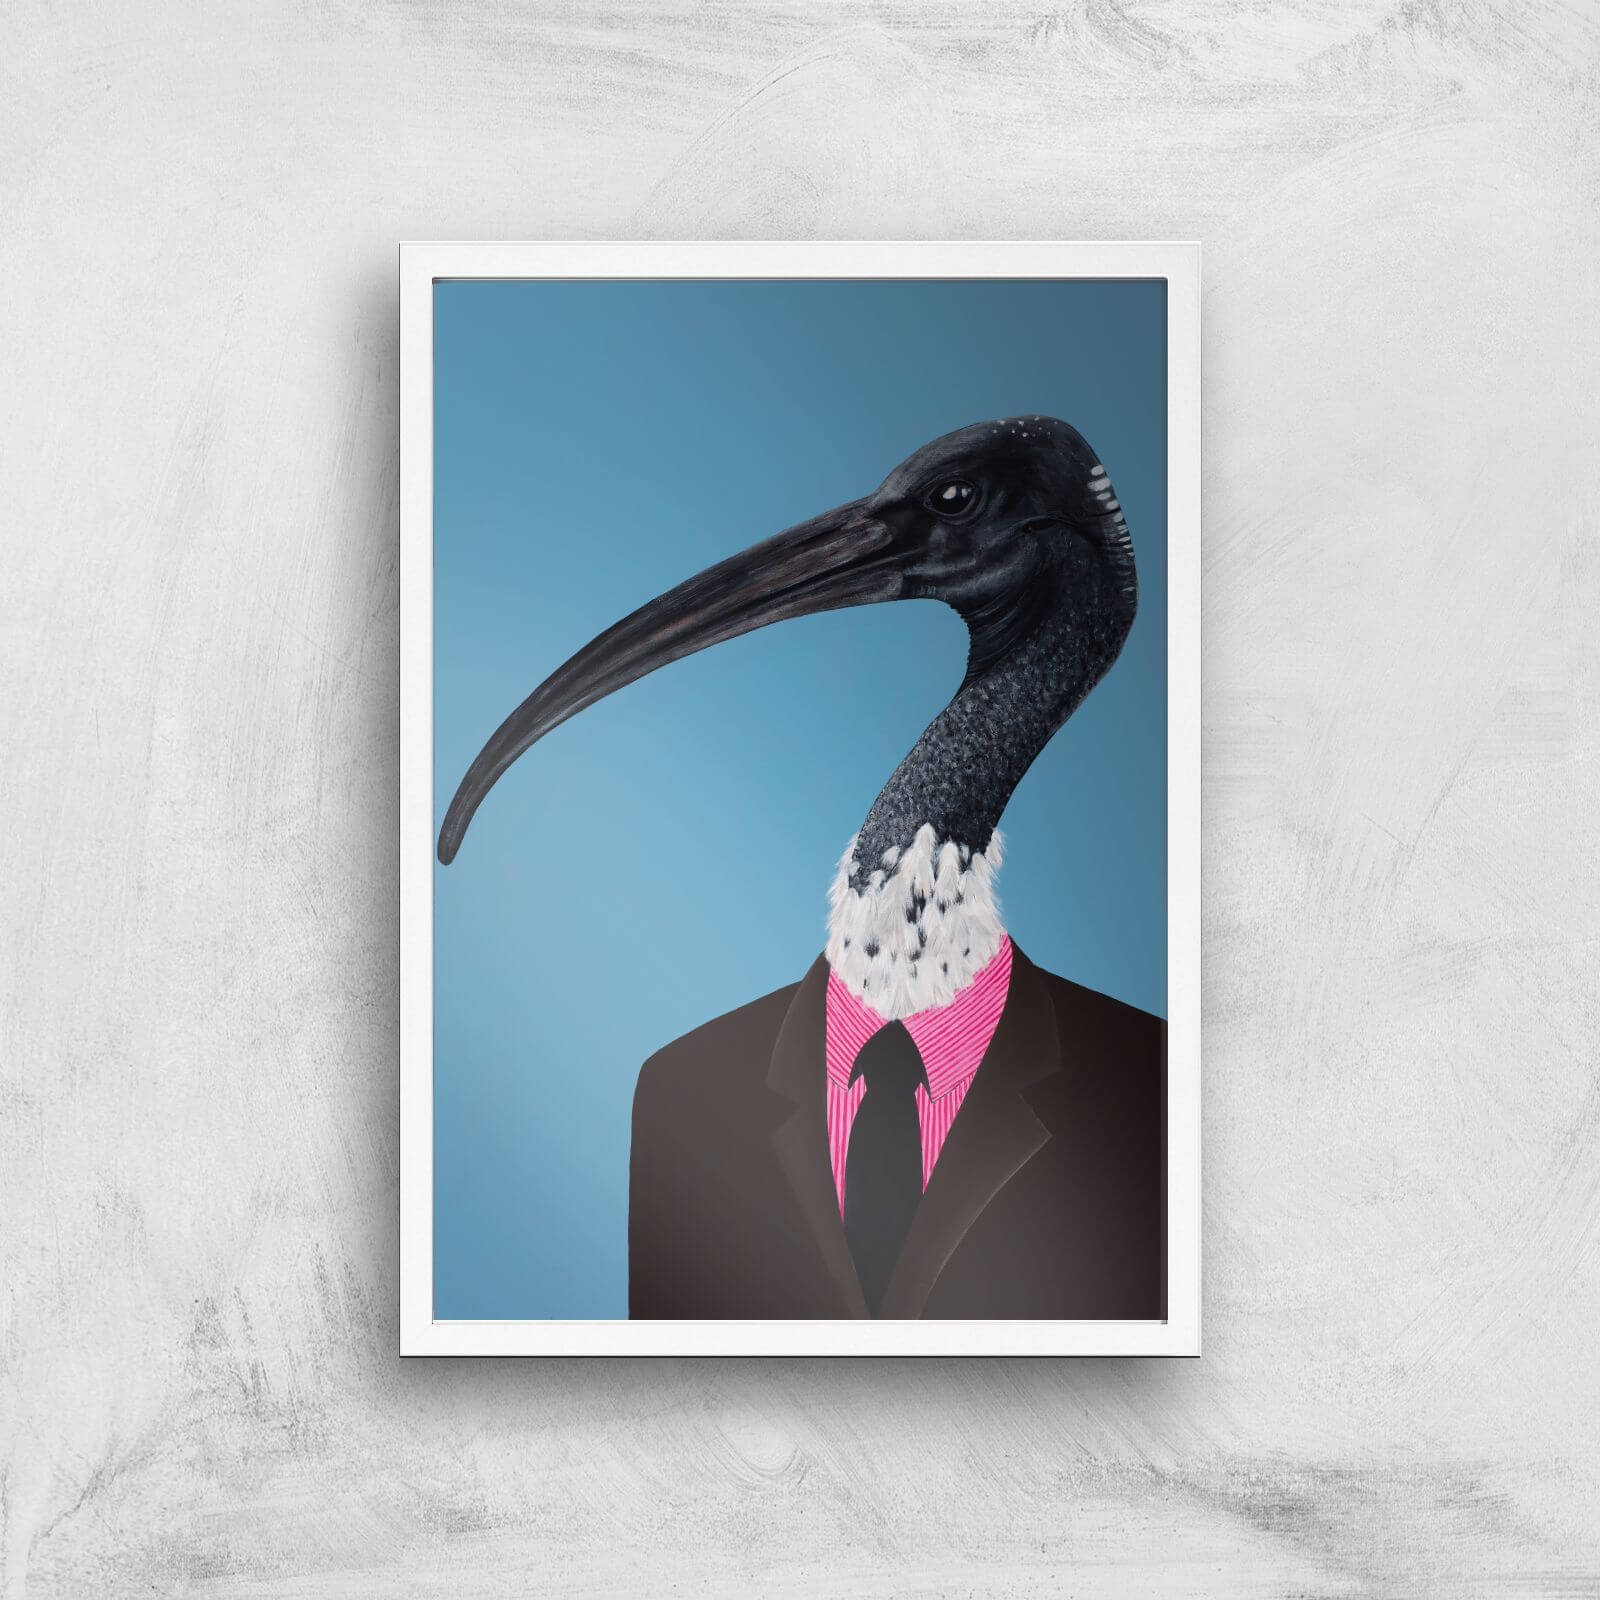 Ibis In Suit Giclee Art Print - A3 - White Frame